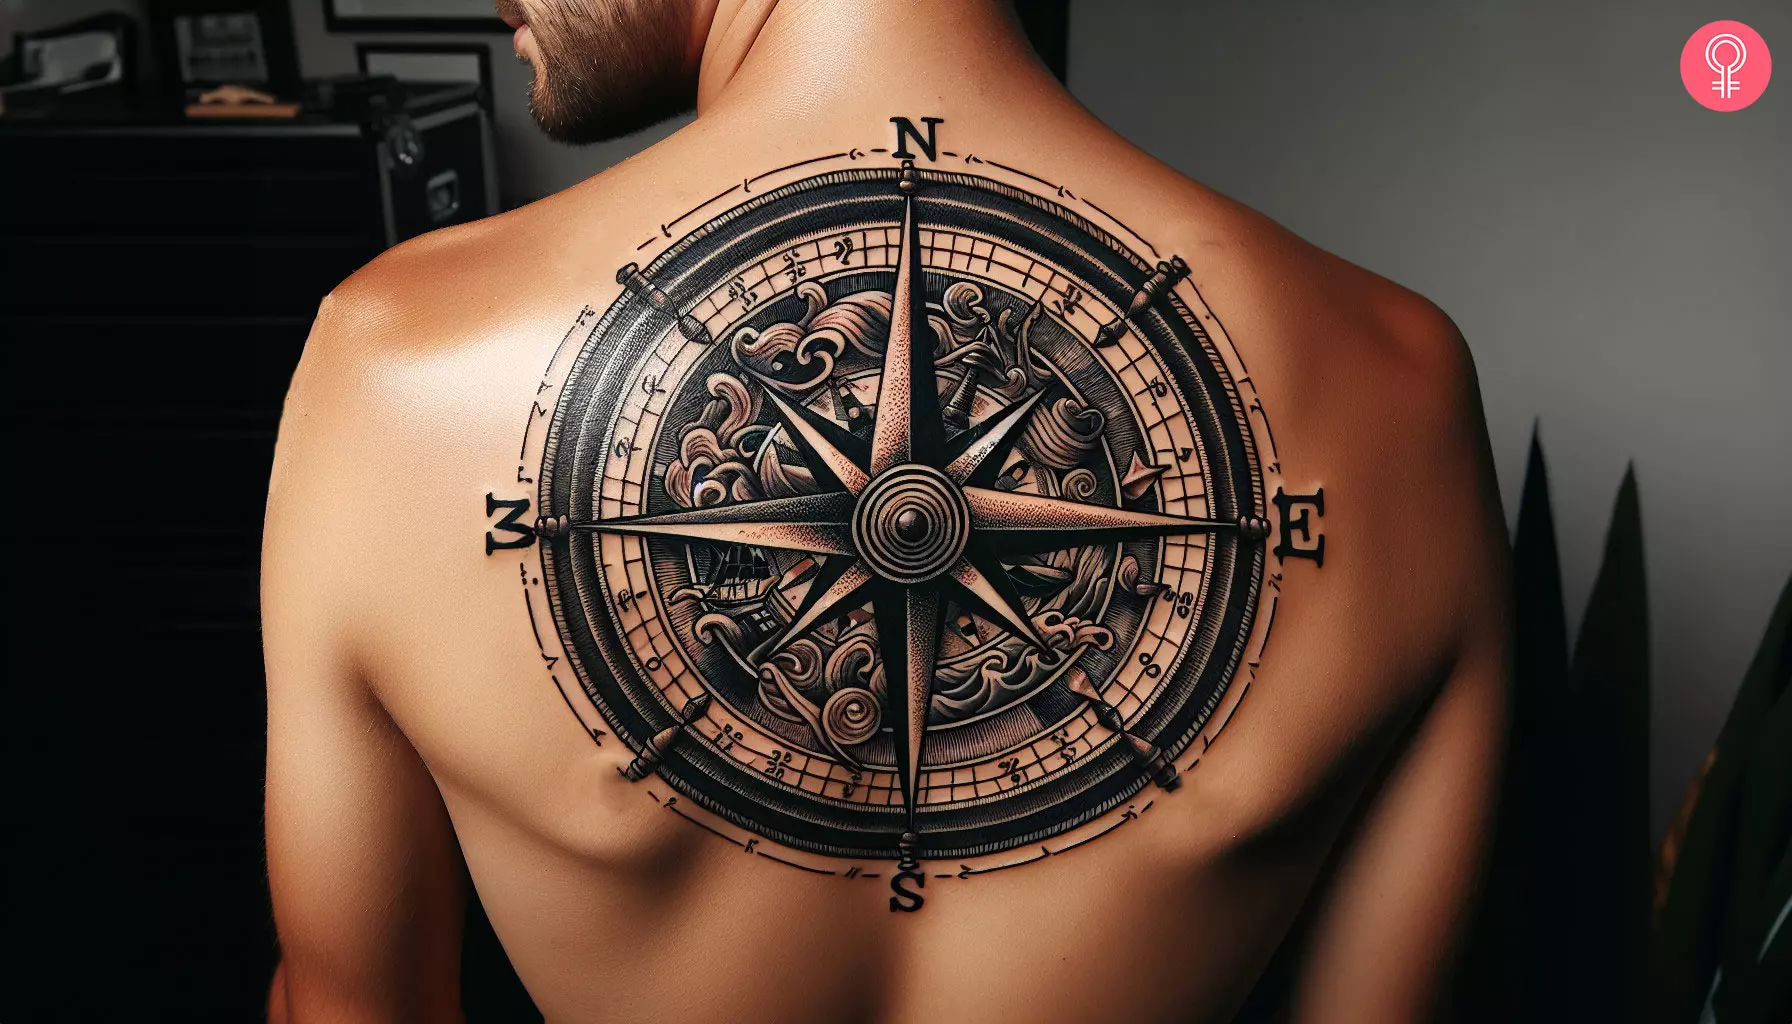 A man with a traditional compass tattoo at the back